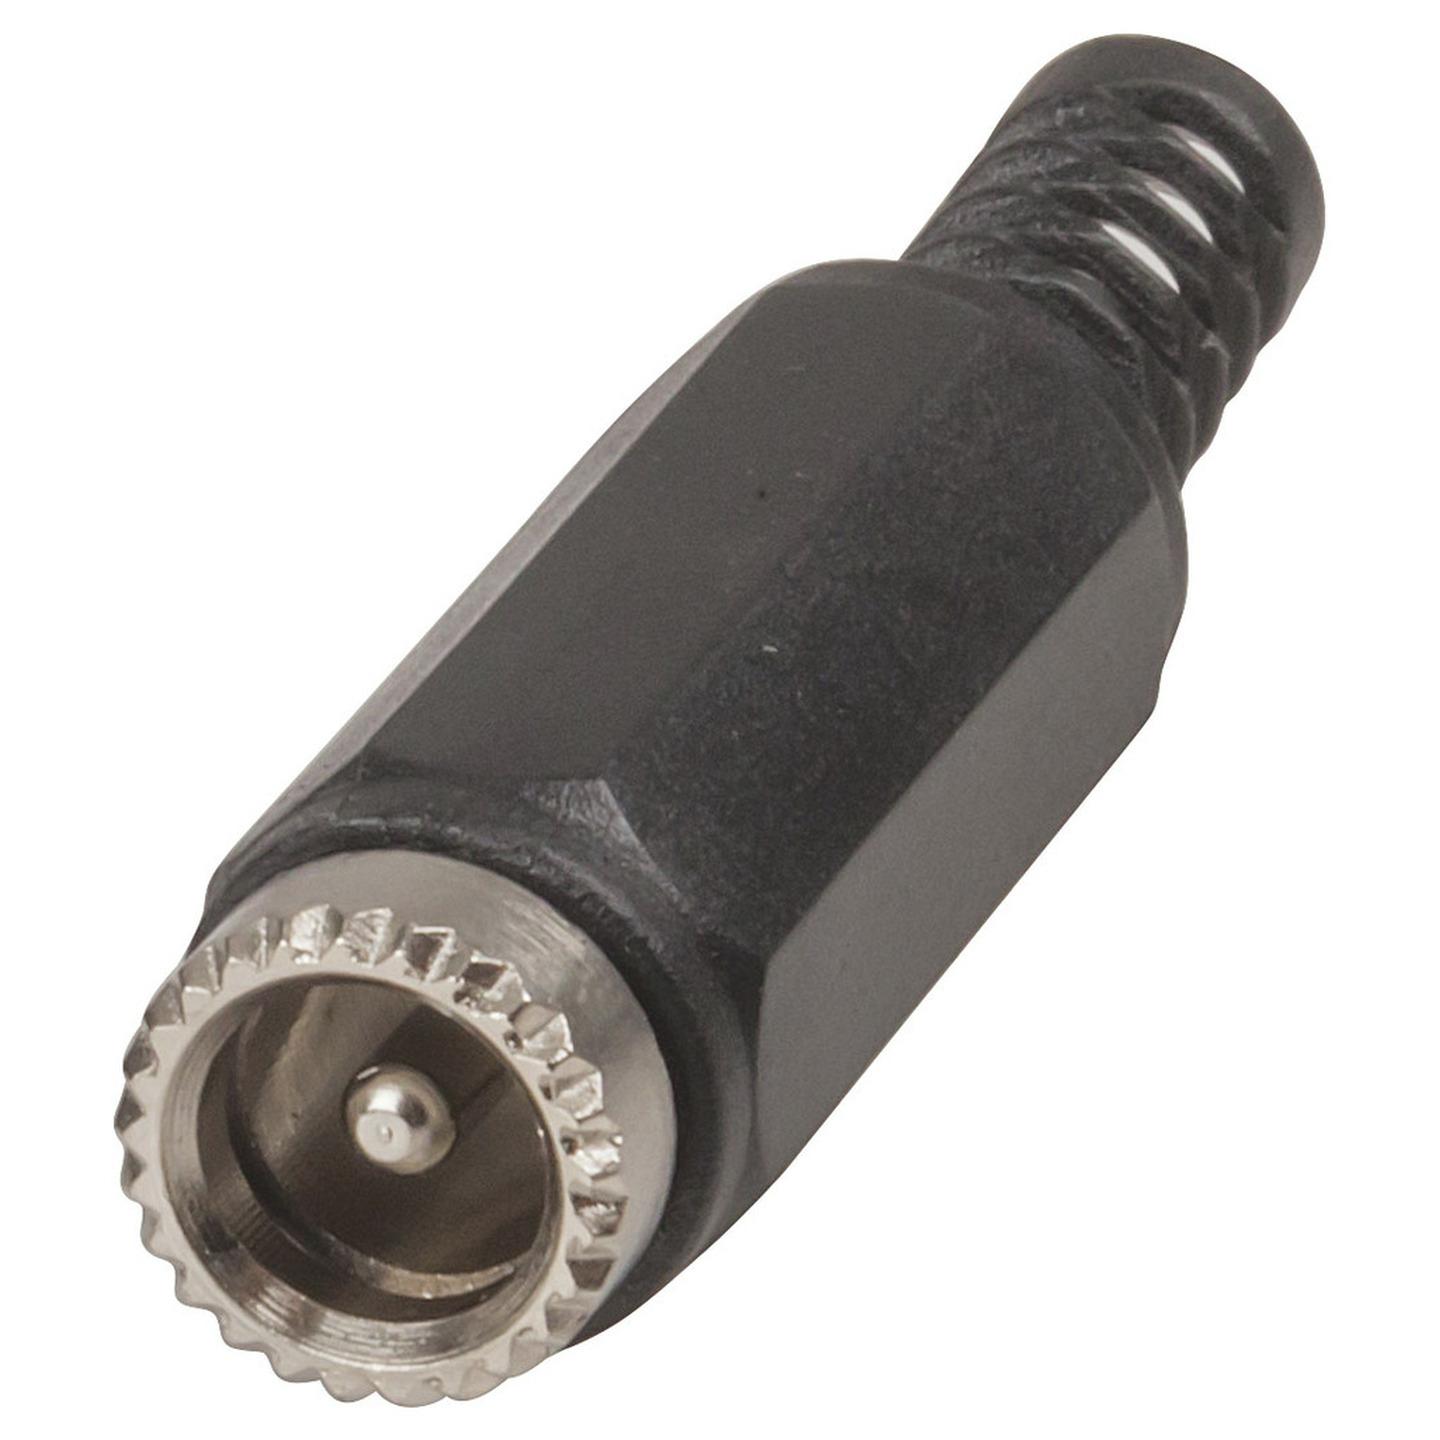 2.1mm InLine Male DC Power Connector